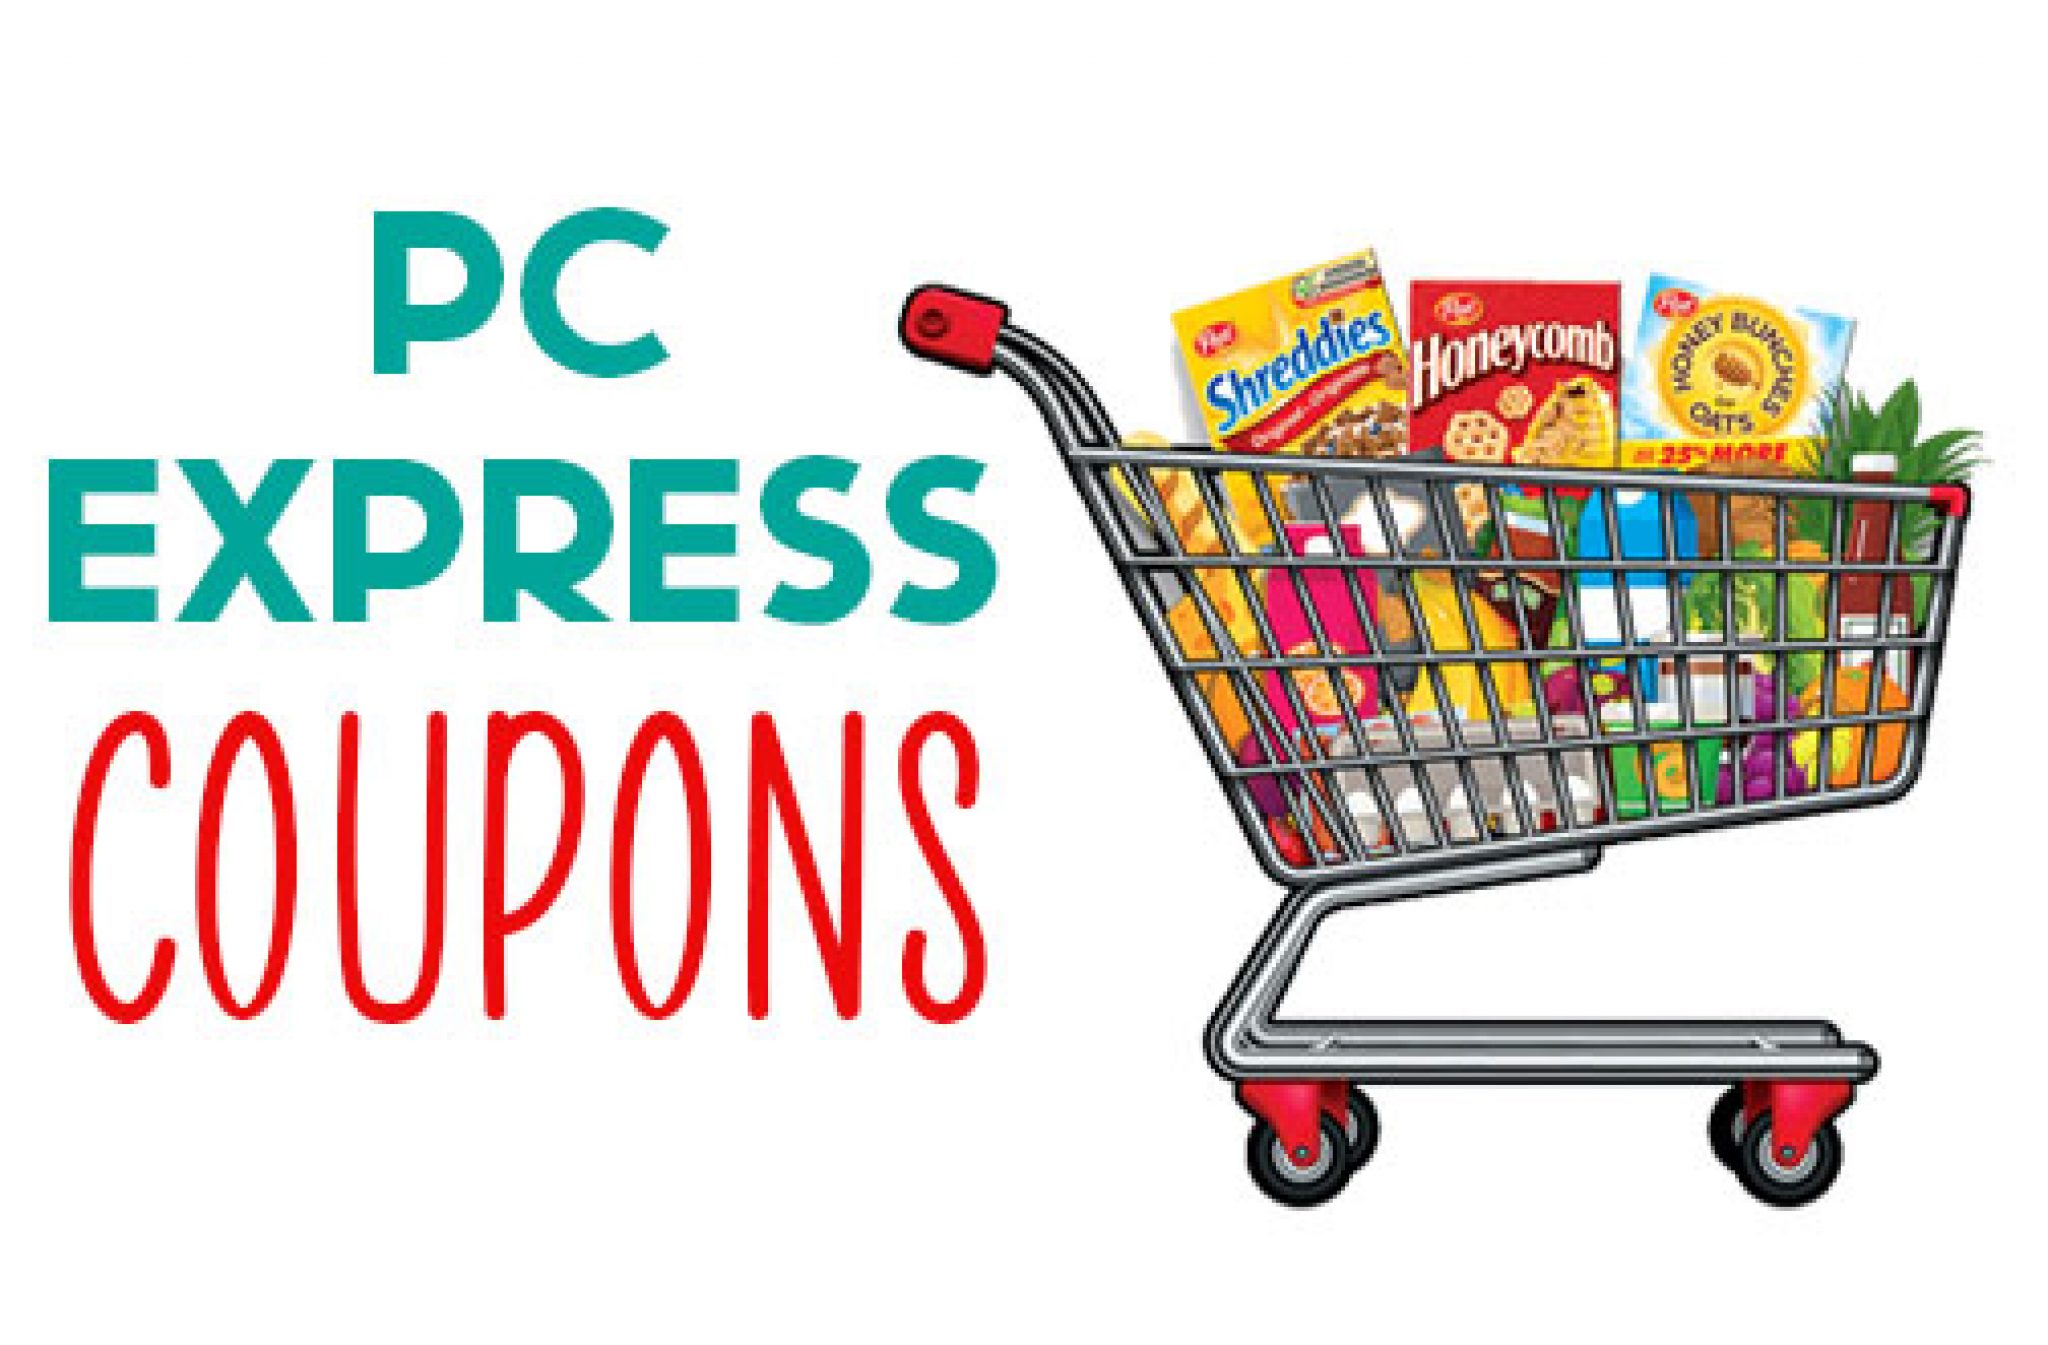 PC Express Coupon Codes 30,000 Points + 3 Months Free Delivery